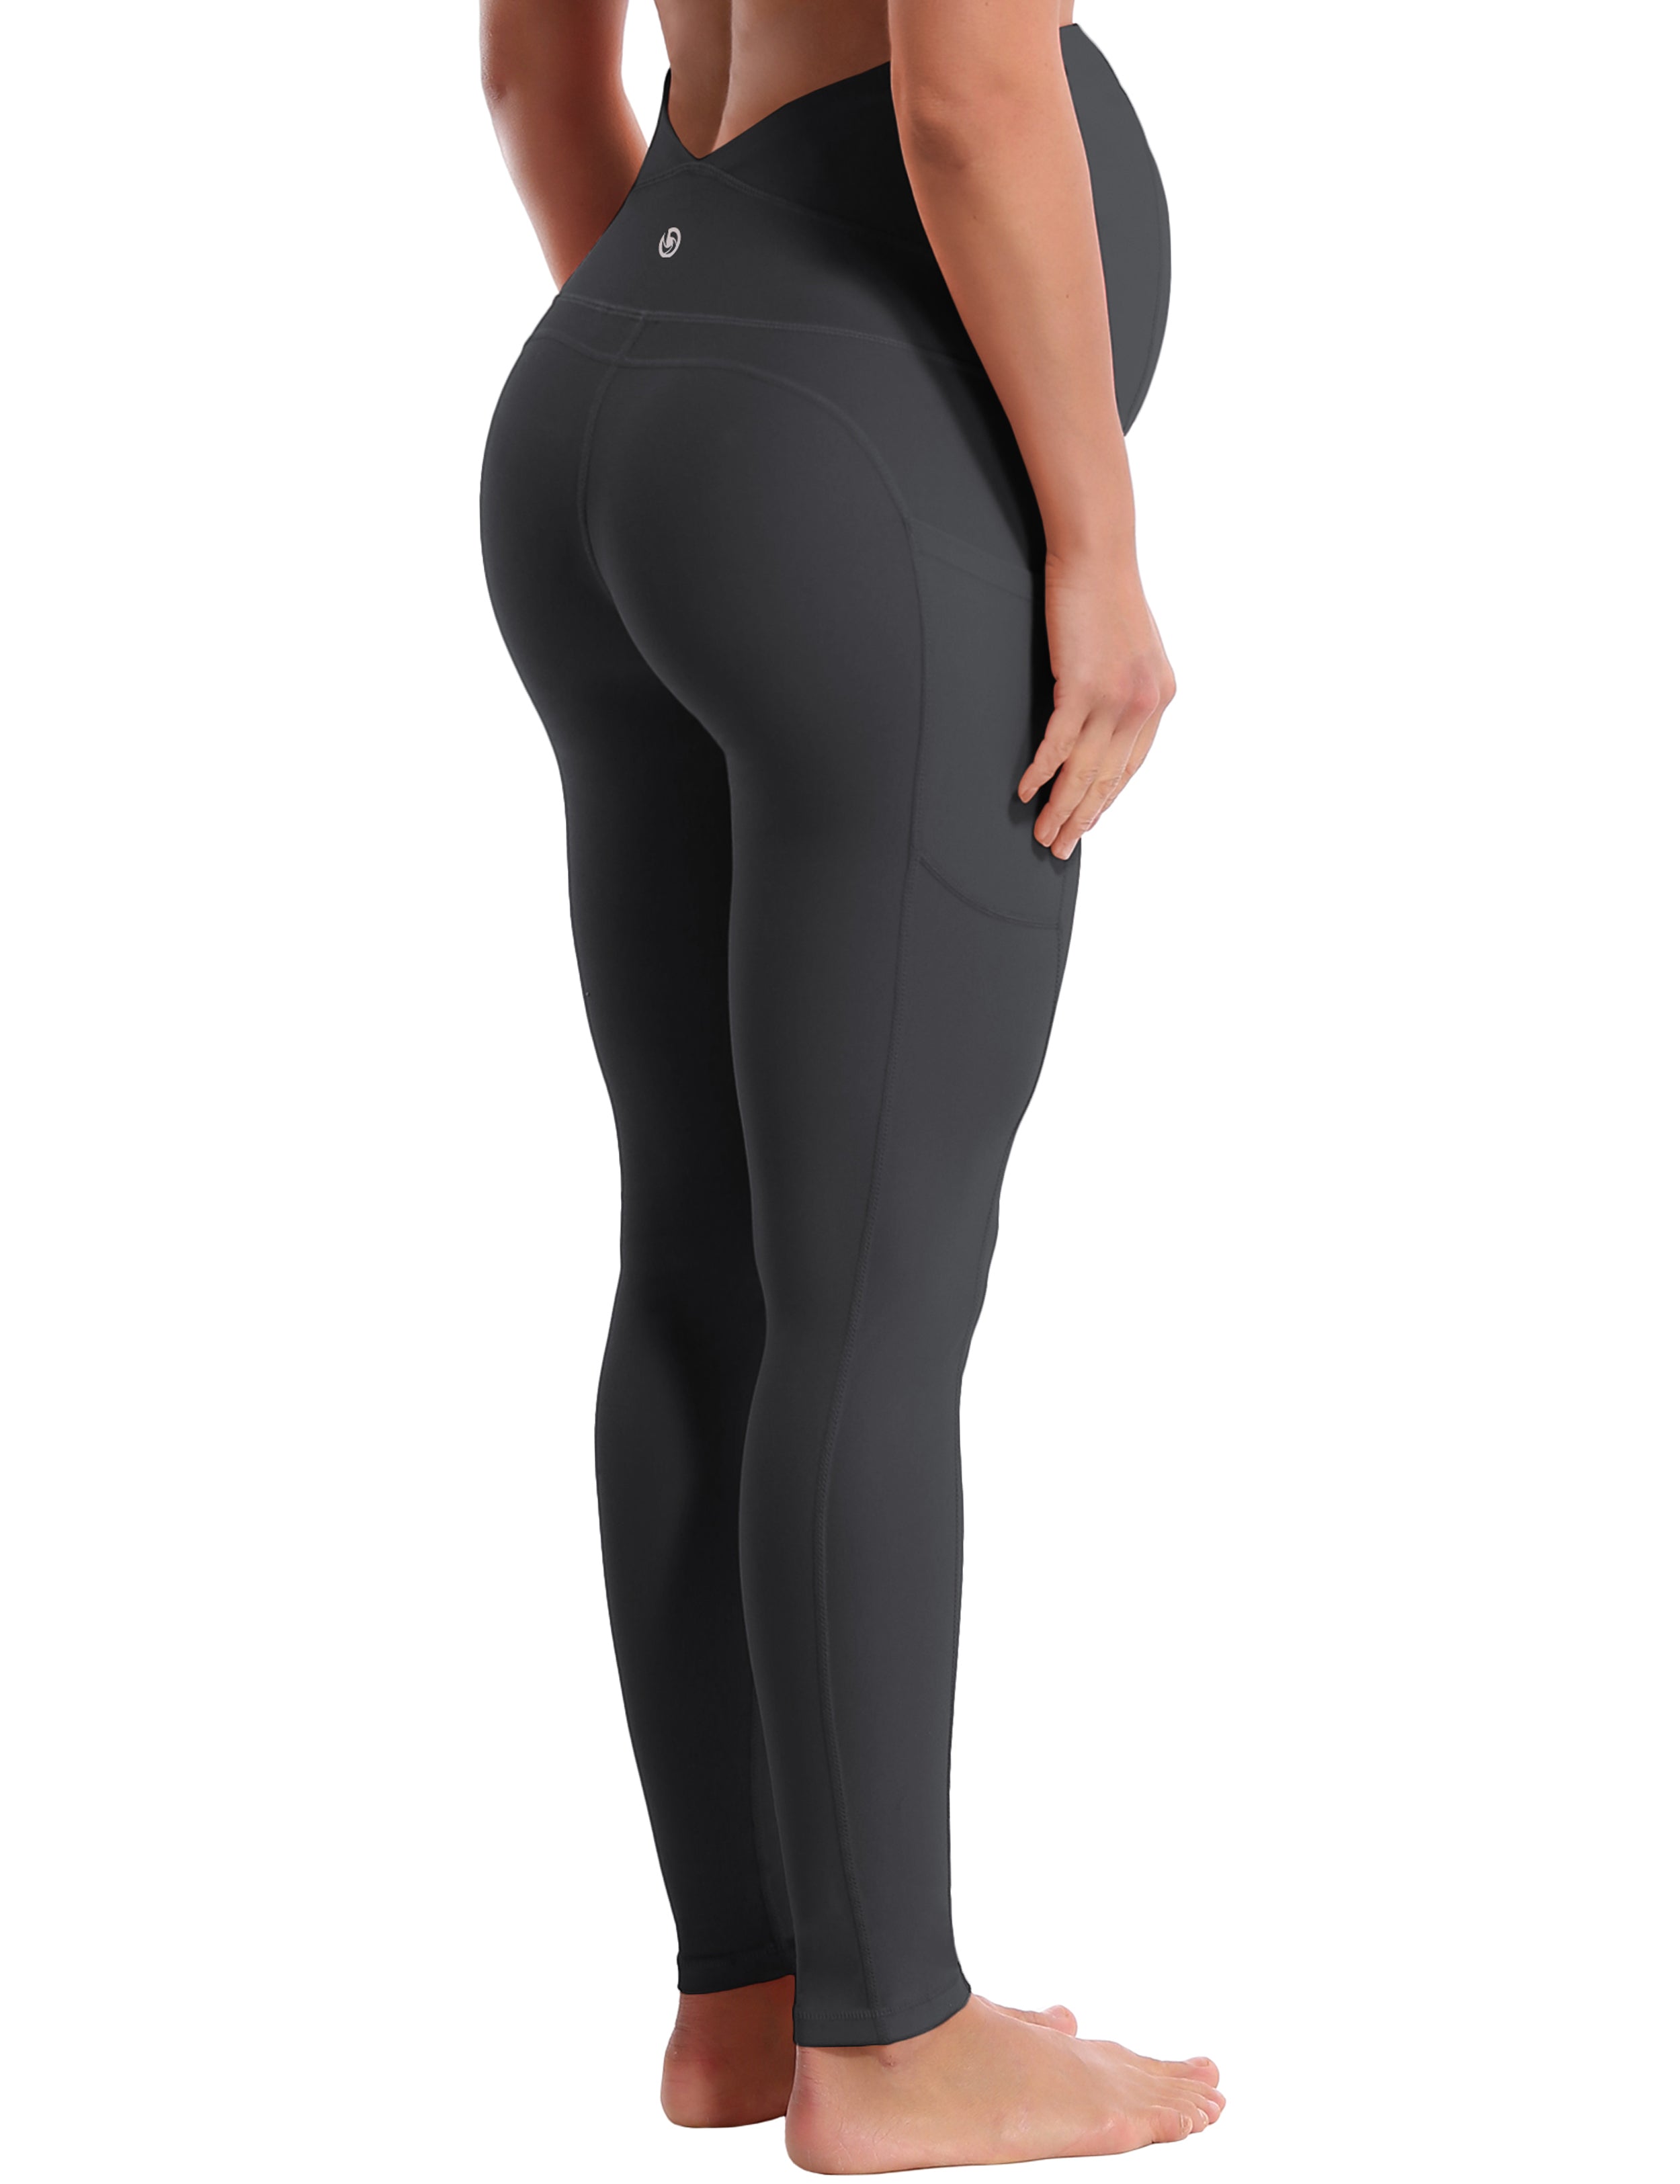 26" Side Pockets Maternity Yoga Pants shadowcharcoal 87%Nylon/13%Spandex Softest-ever fabric High elasticity 4-way stretch Fabric doesn't attract lint easily No see-through Moisture-wicking Machine wash